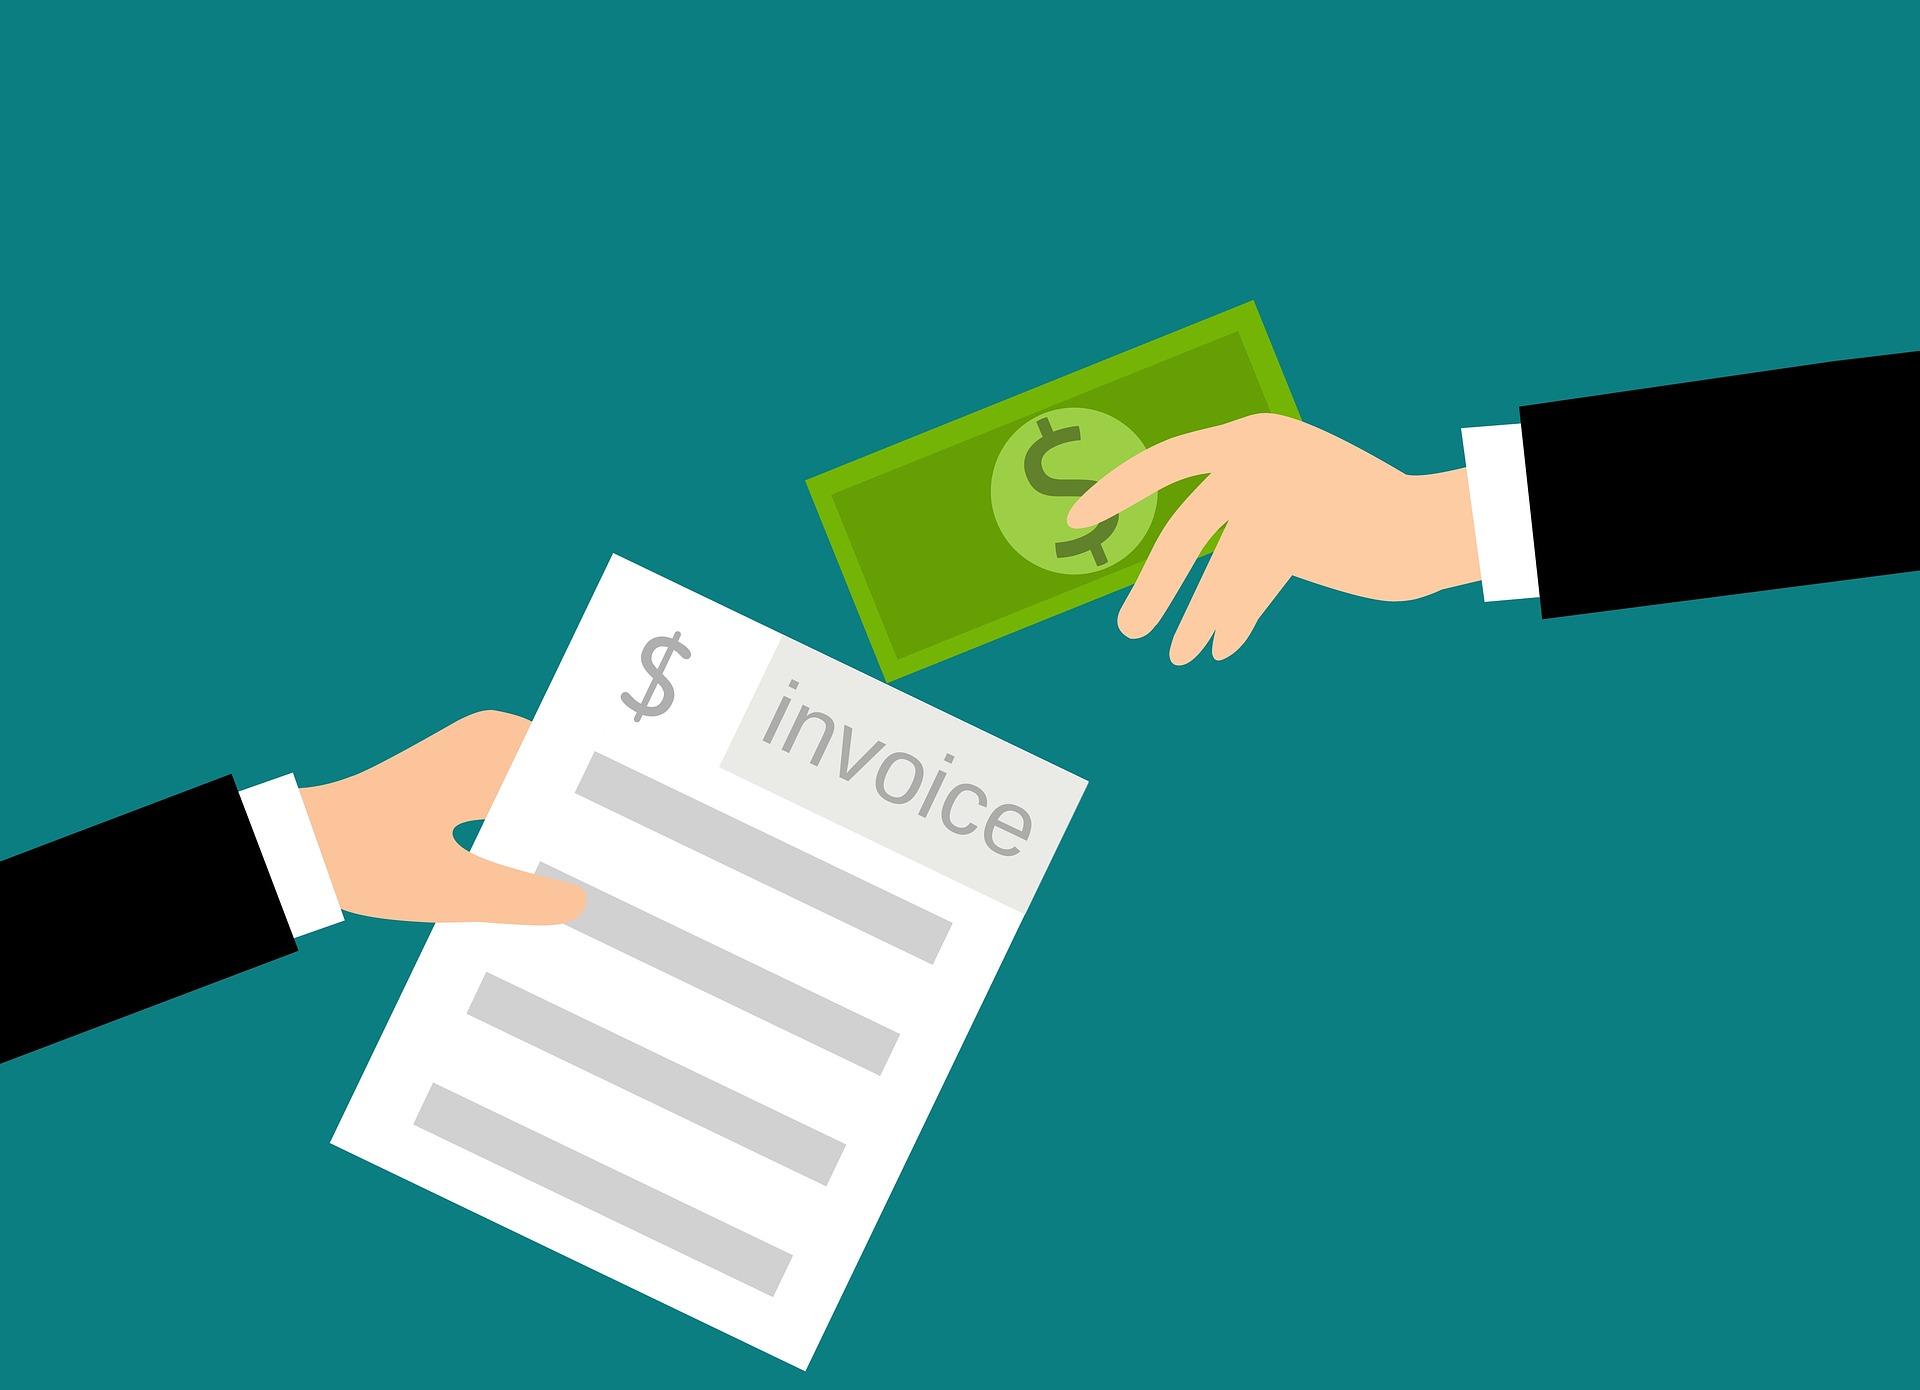 Invoices - Image by mohamed Hassan from Pixabay